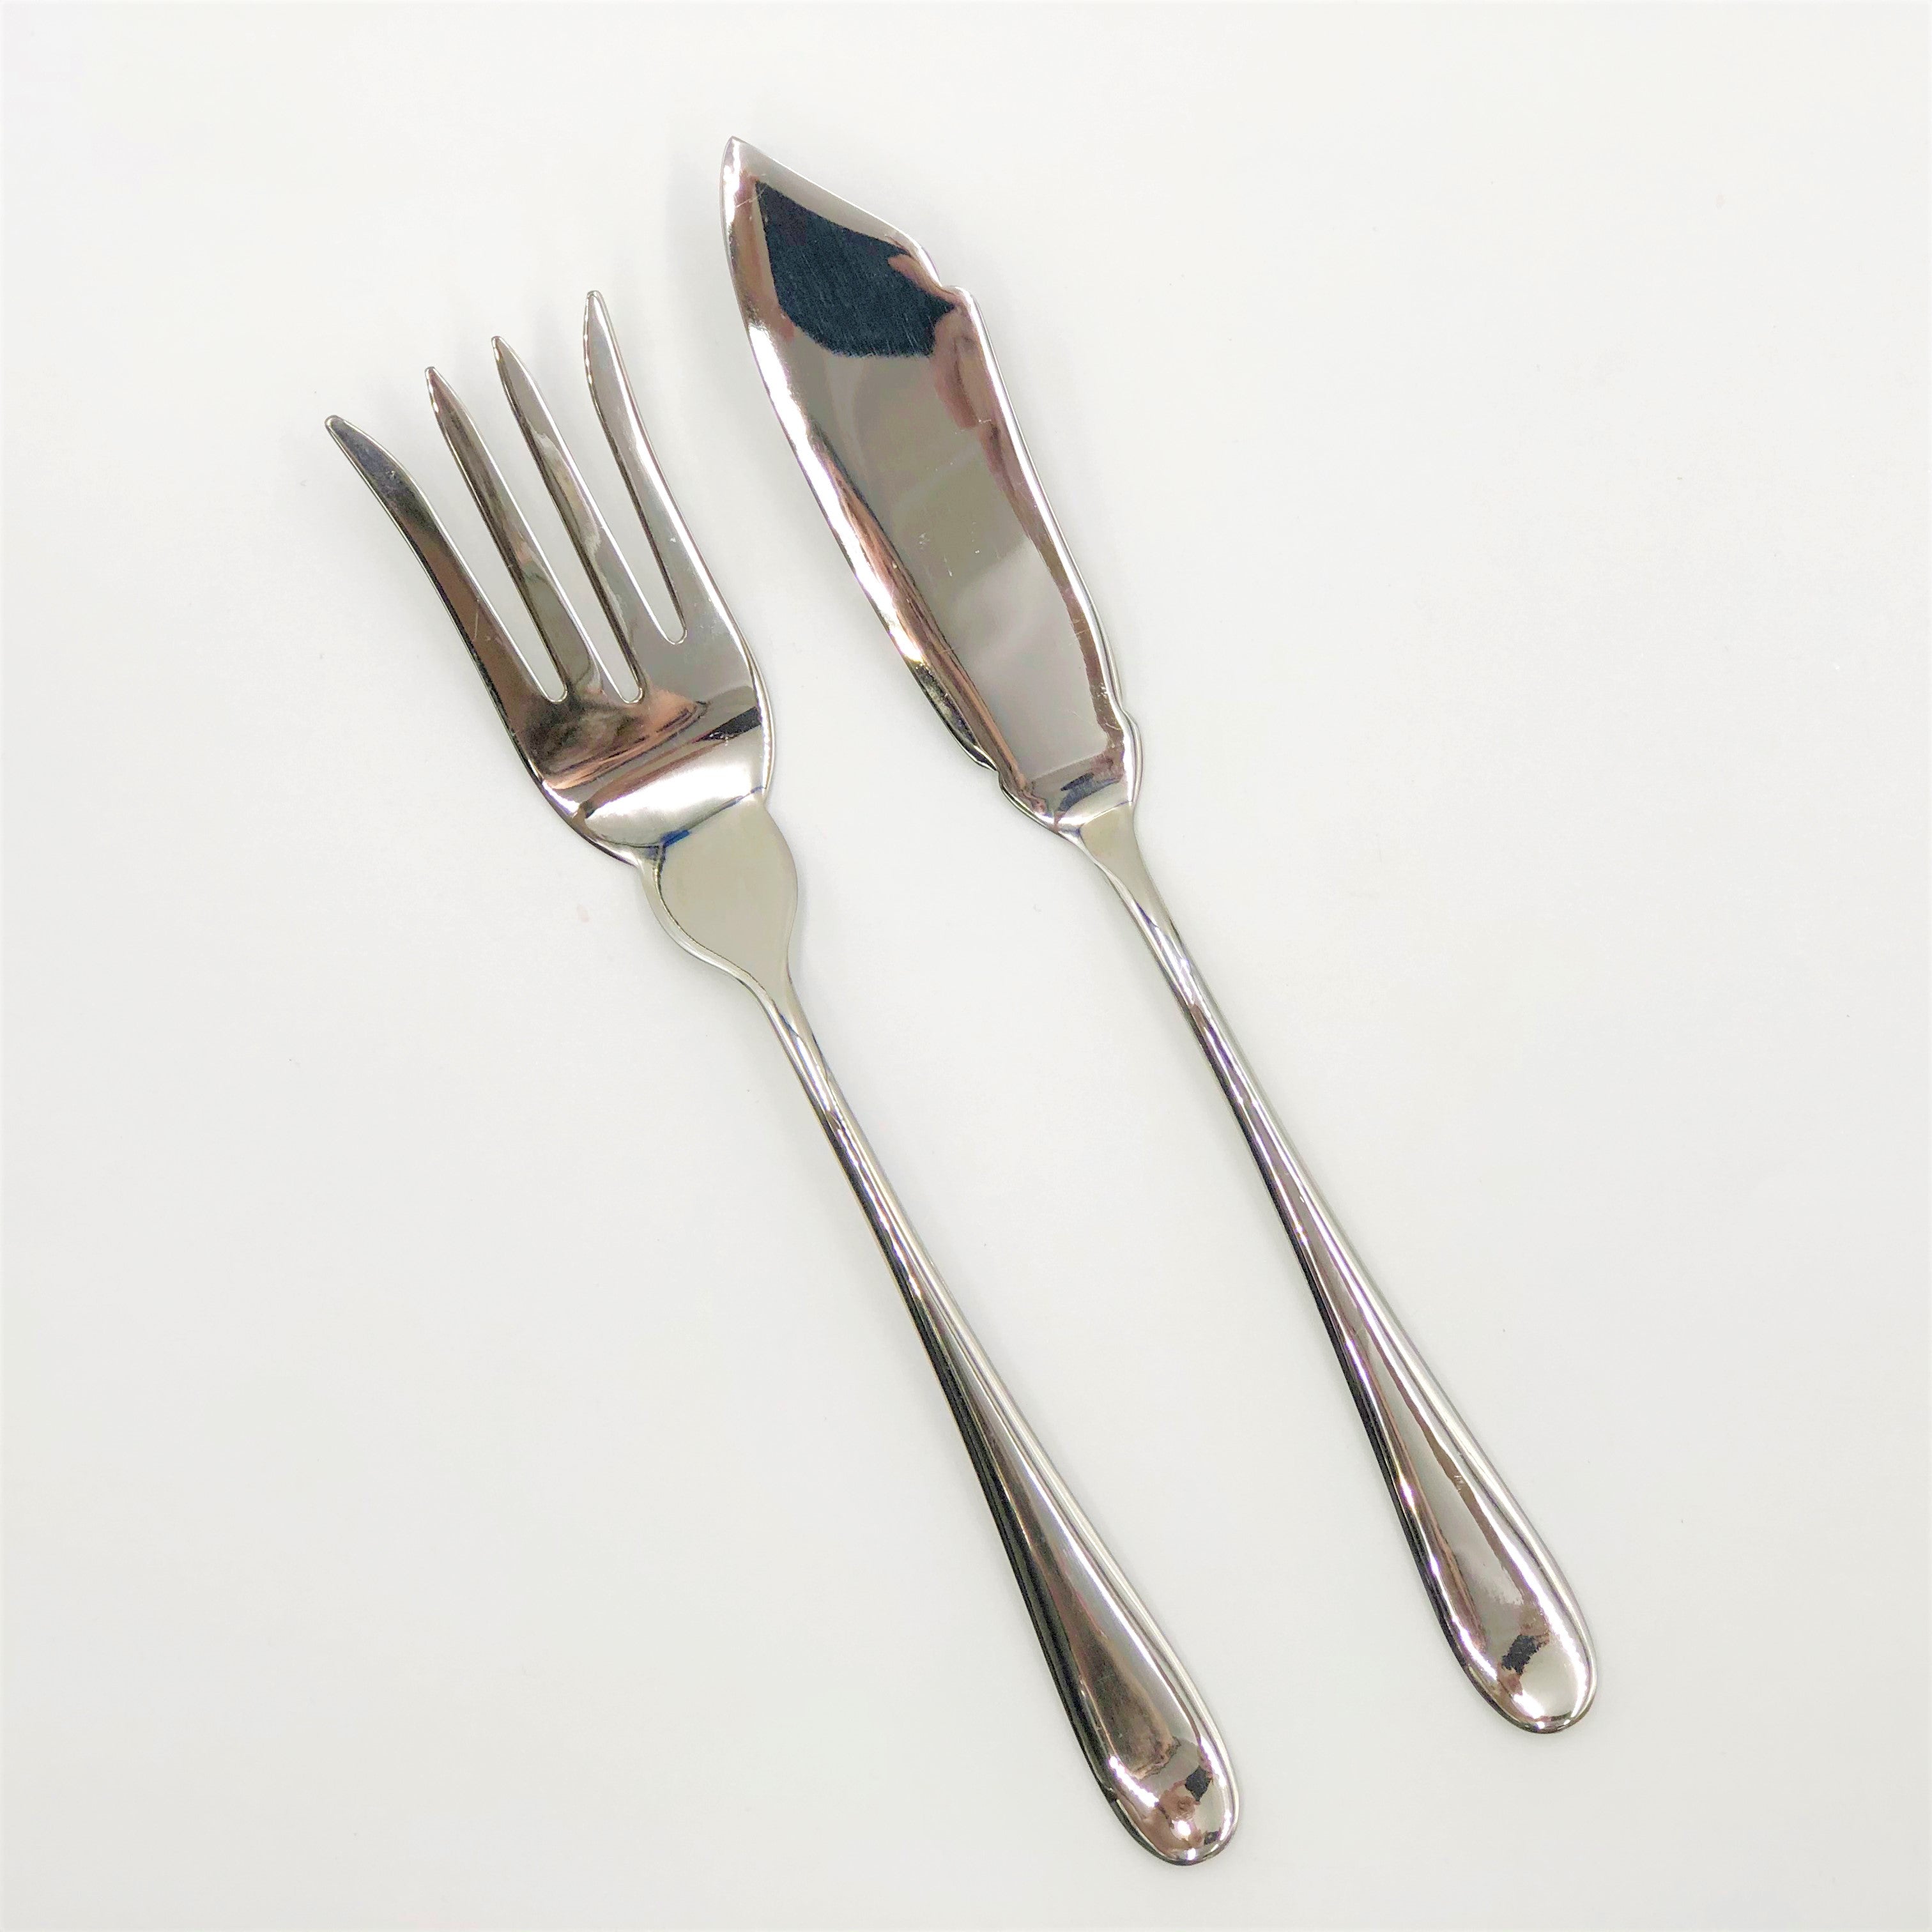 Stainless Steel Fish Serving Knife and Serving Fork Two (2) Piece Serving Set Great for Entertaining